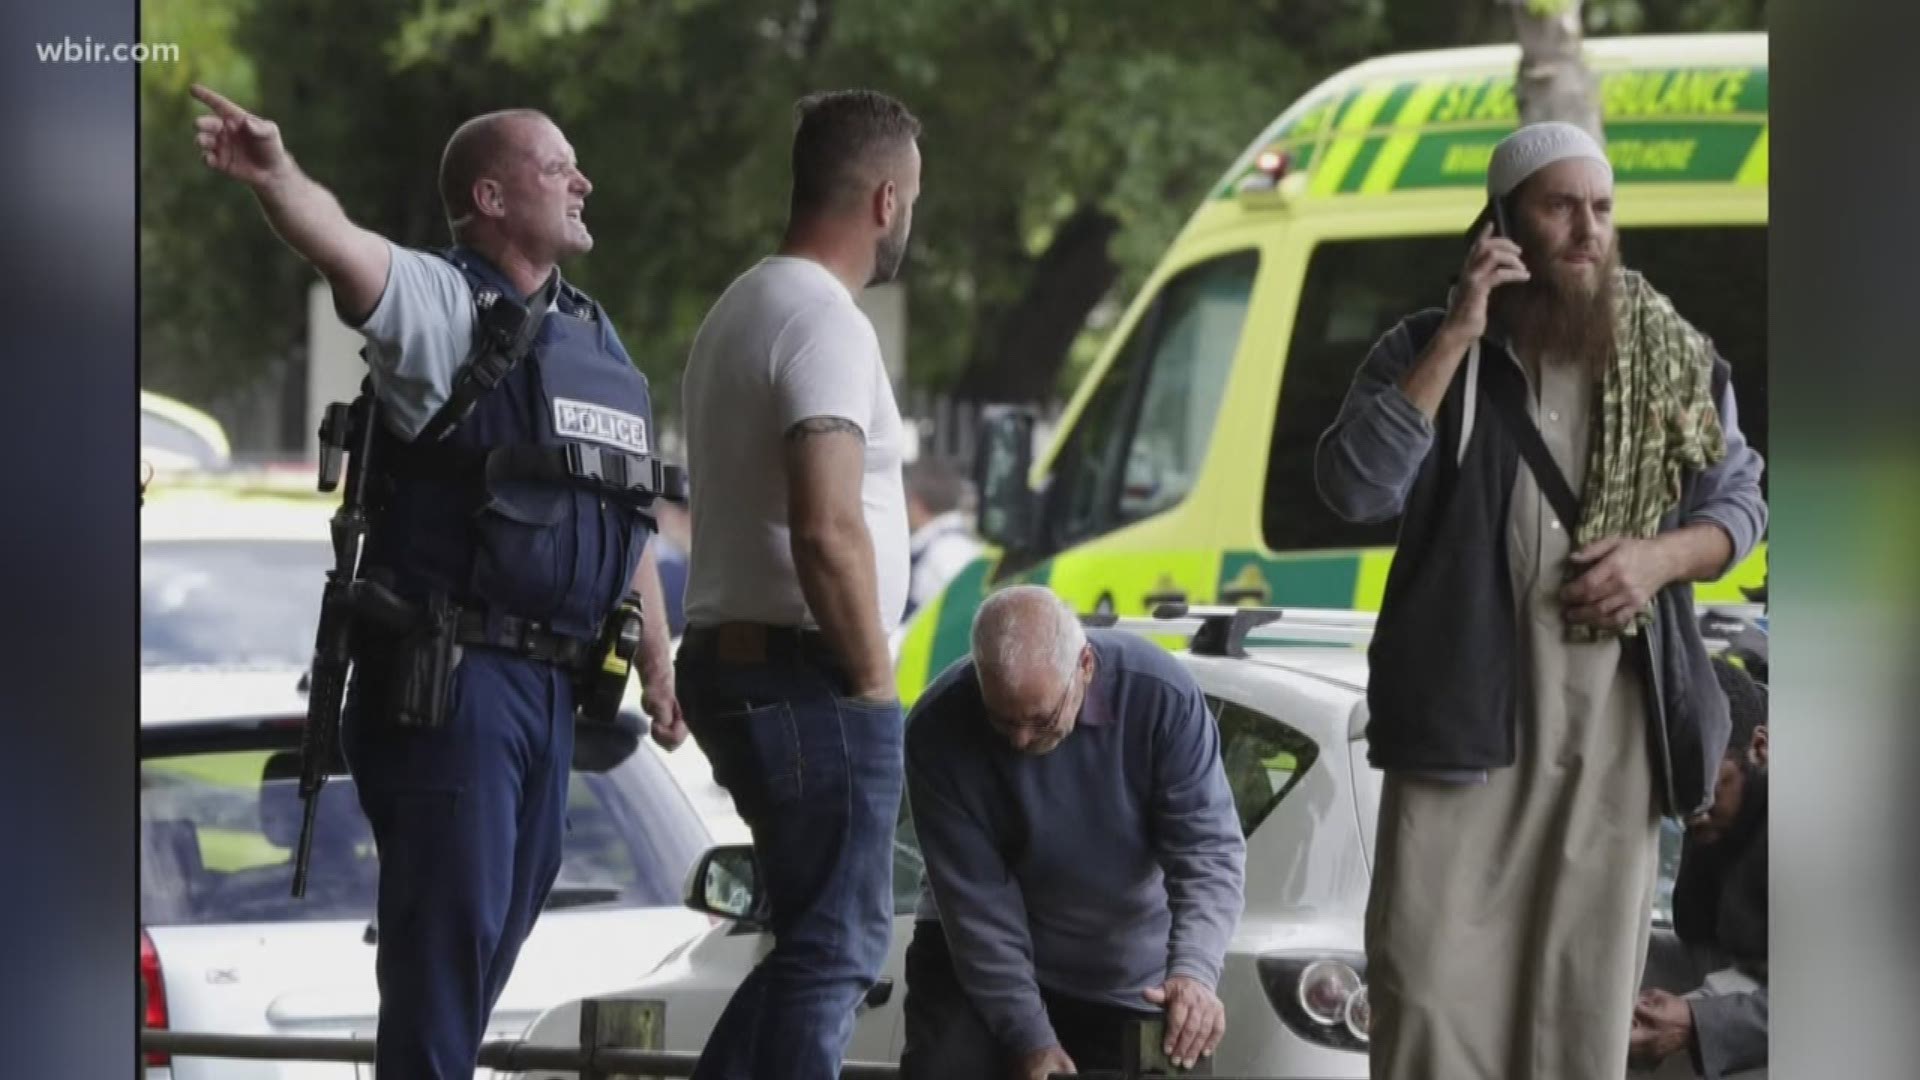 New Zealand officials now say 49 people are dead and at least 20 others hurt after shootings at two mosques.